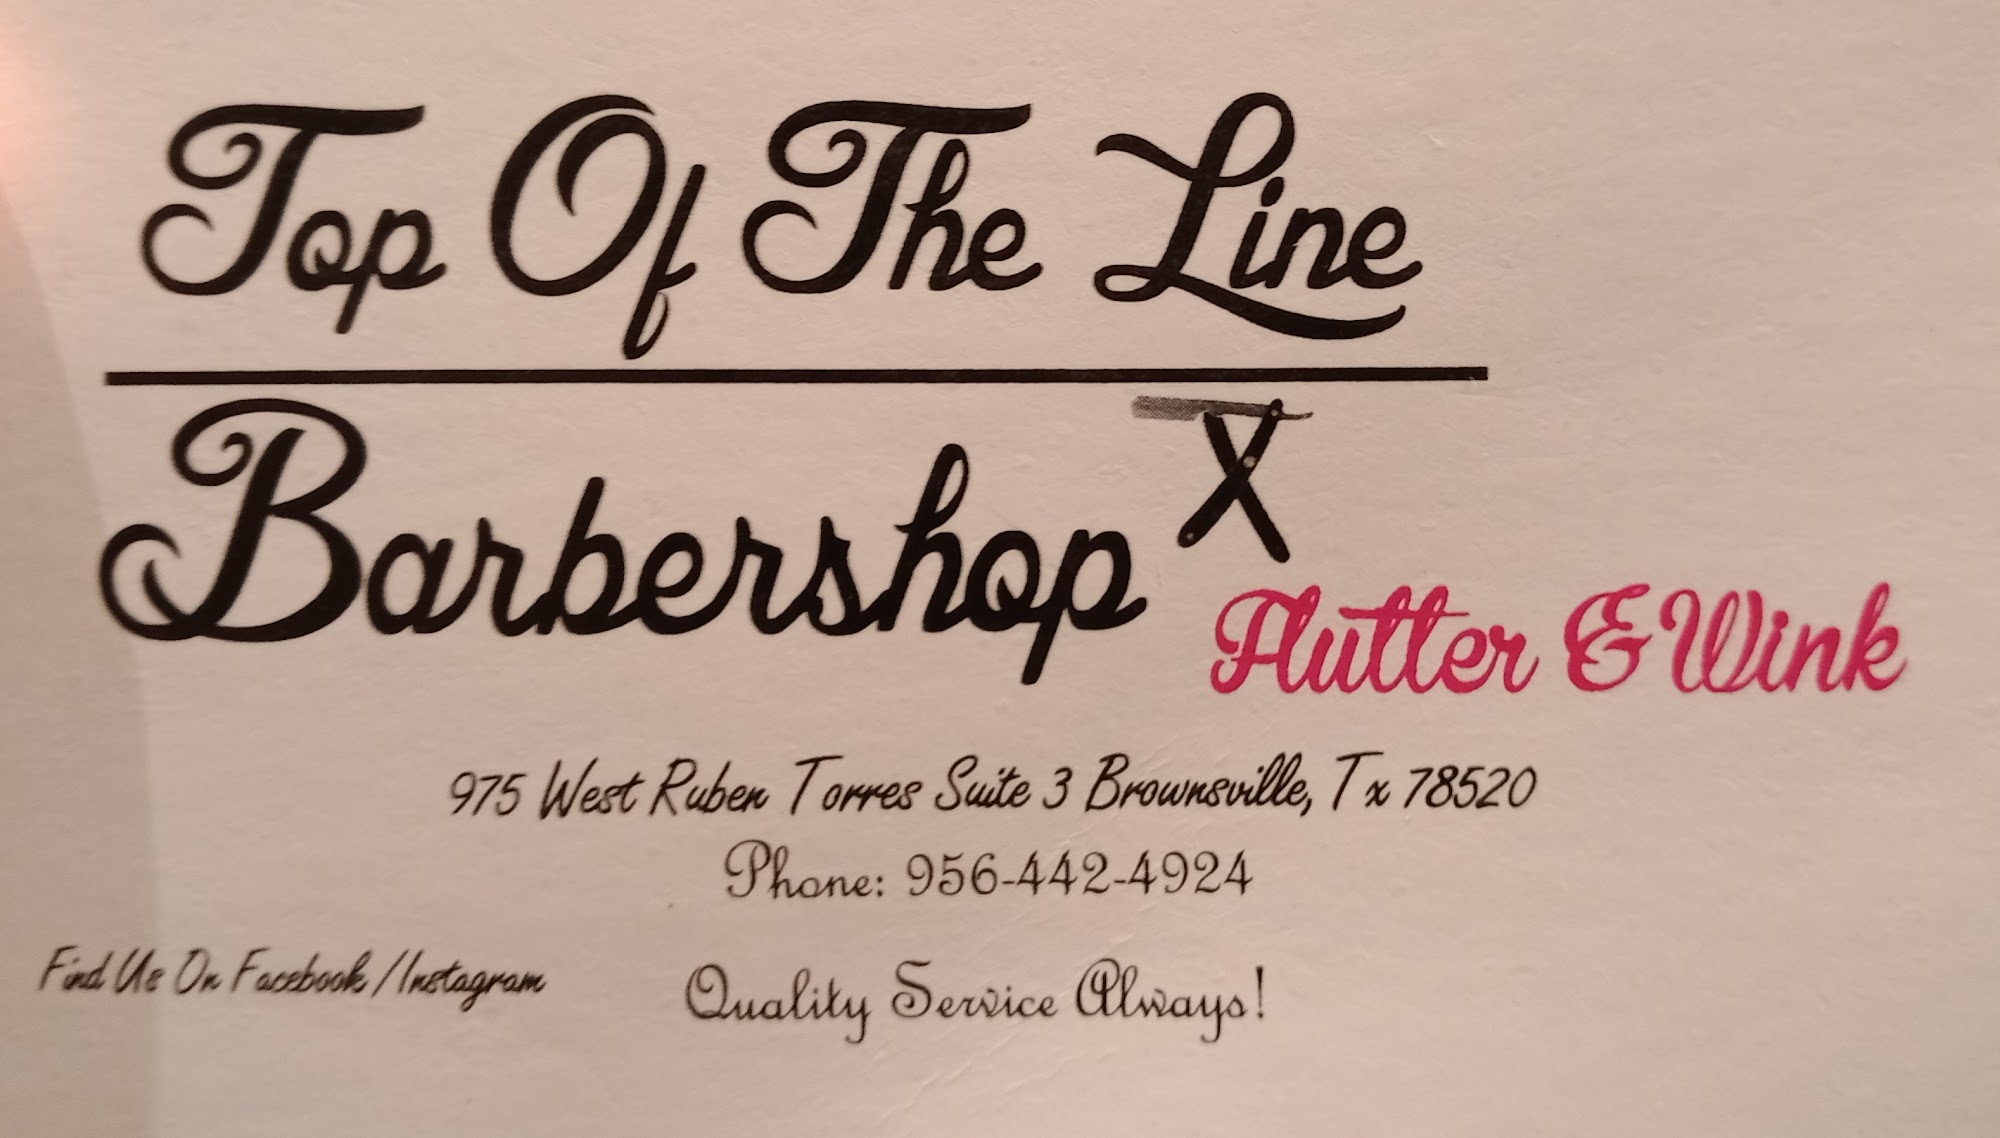 Top Of The Line Barbershop X Flutter and Wink